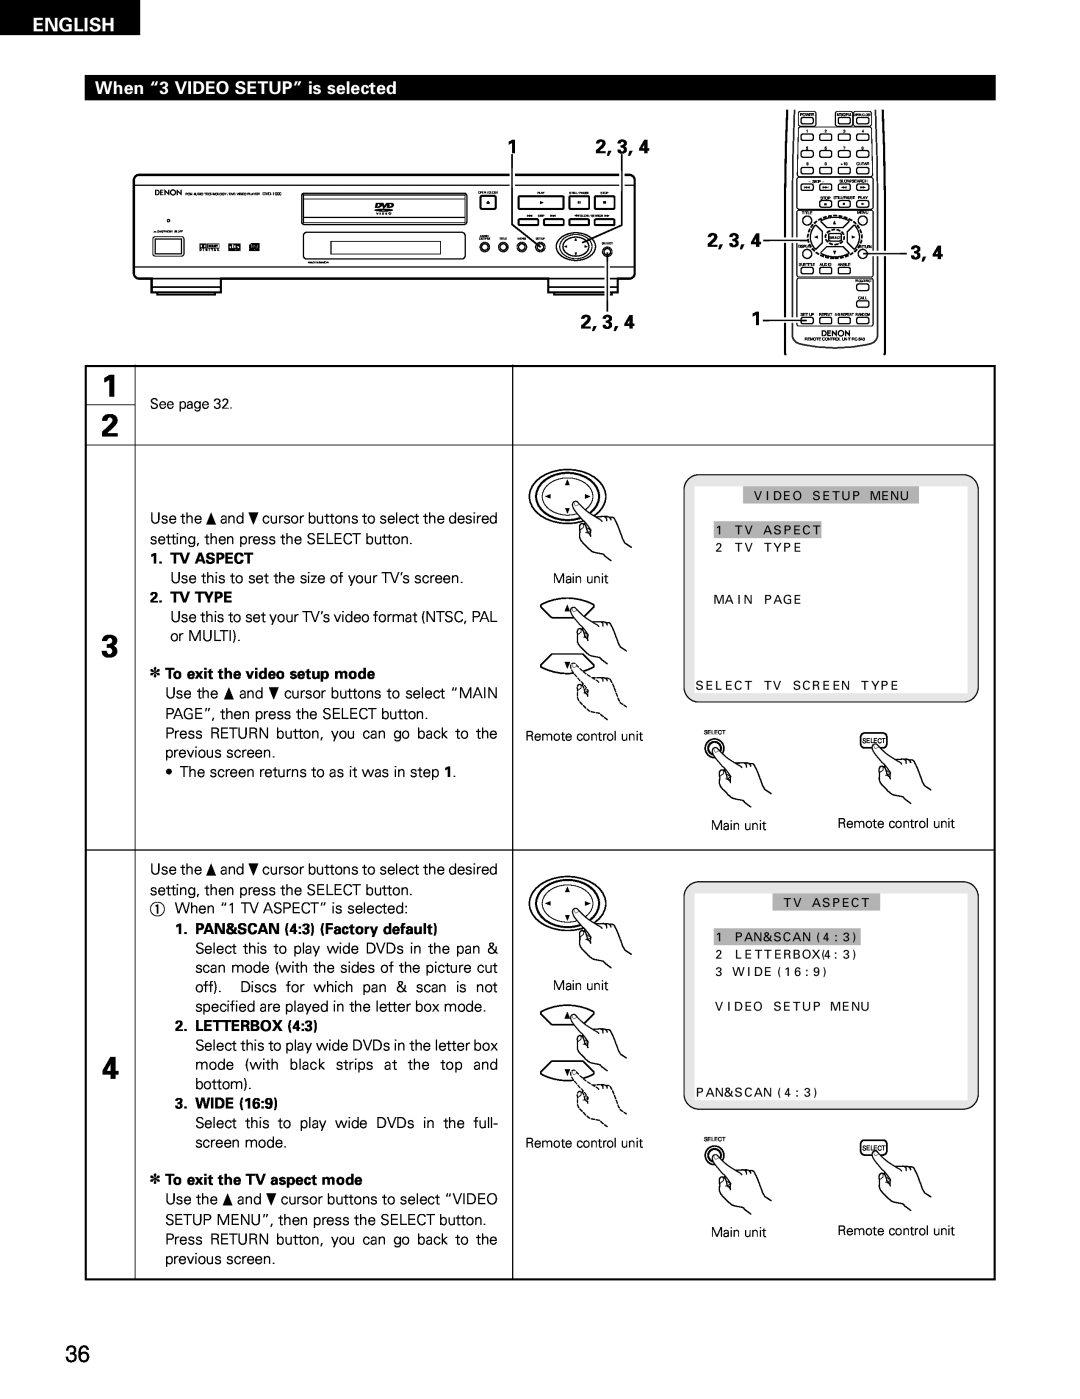 Denon DVD-1000 When “3 VIDEO SETUP” is selected, 2, 3, English, Tv Aspect, Tv Type, To exit the video setup mode, Wide 